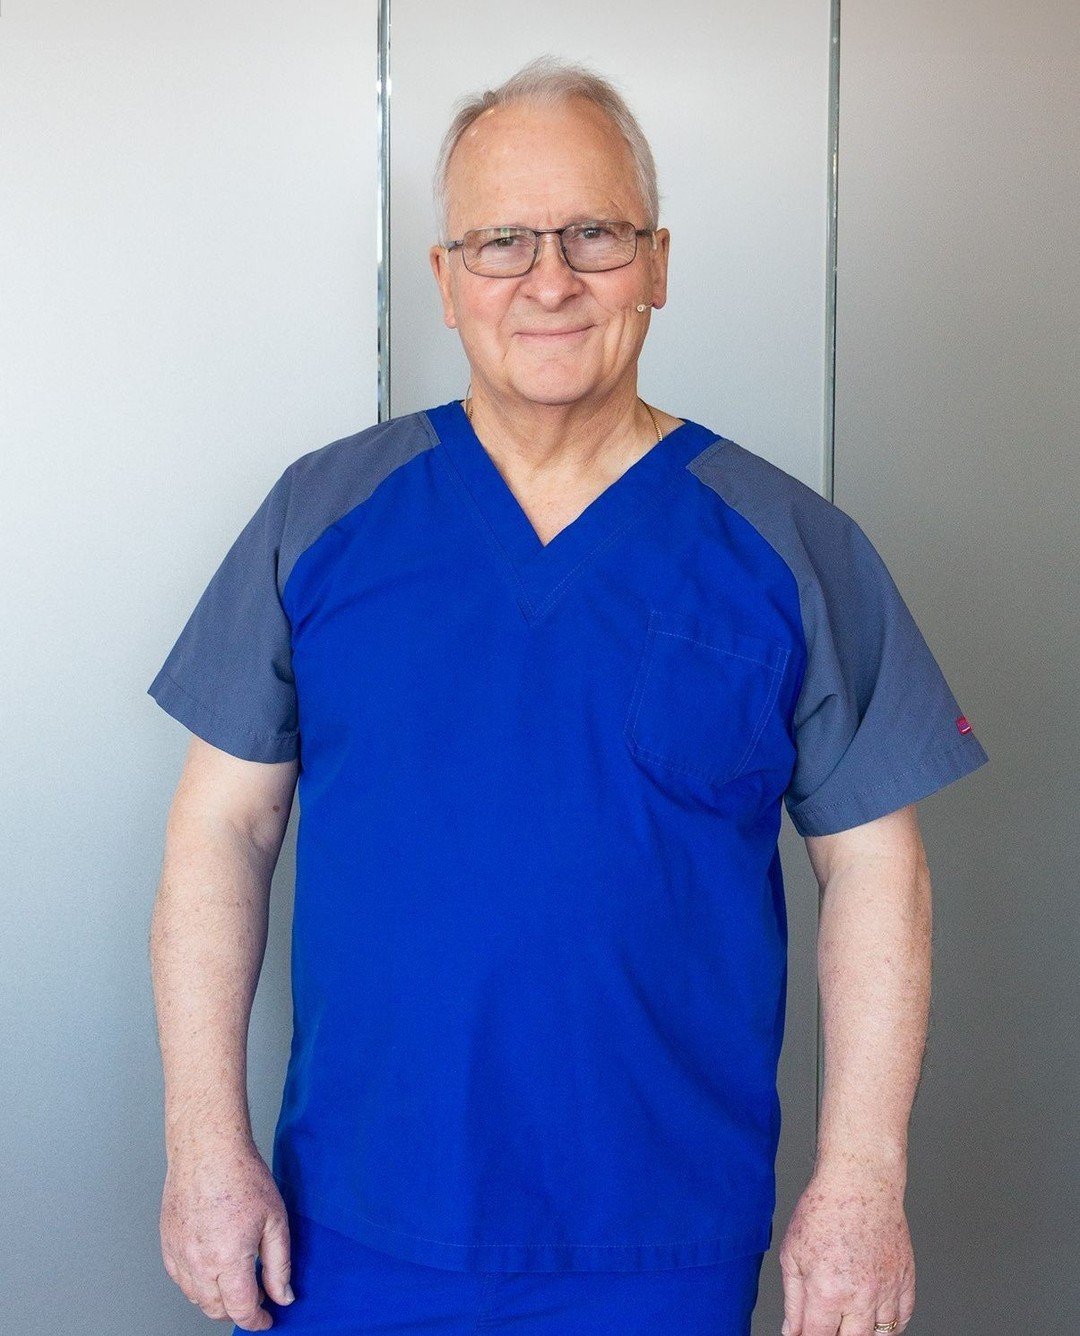 Meet Dr. Morison!⁠
⁠
Dr. Morison qualified in medicine in London, UK in 1976 and proceeded to do his residency which included 2 years in family practice and another 2 years of internal medicine at the U of A hospital in Edmonton, AB. He completed 6 m